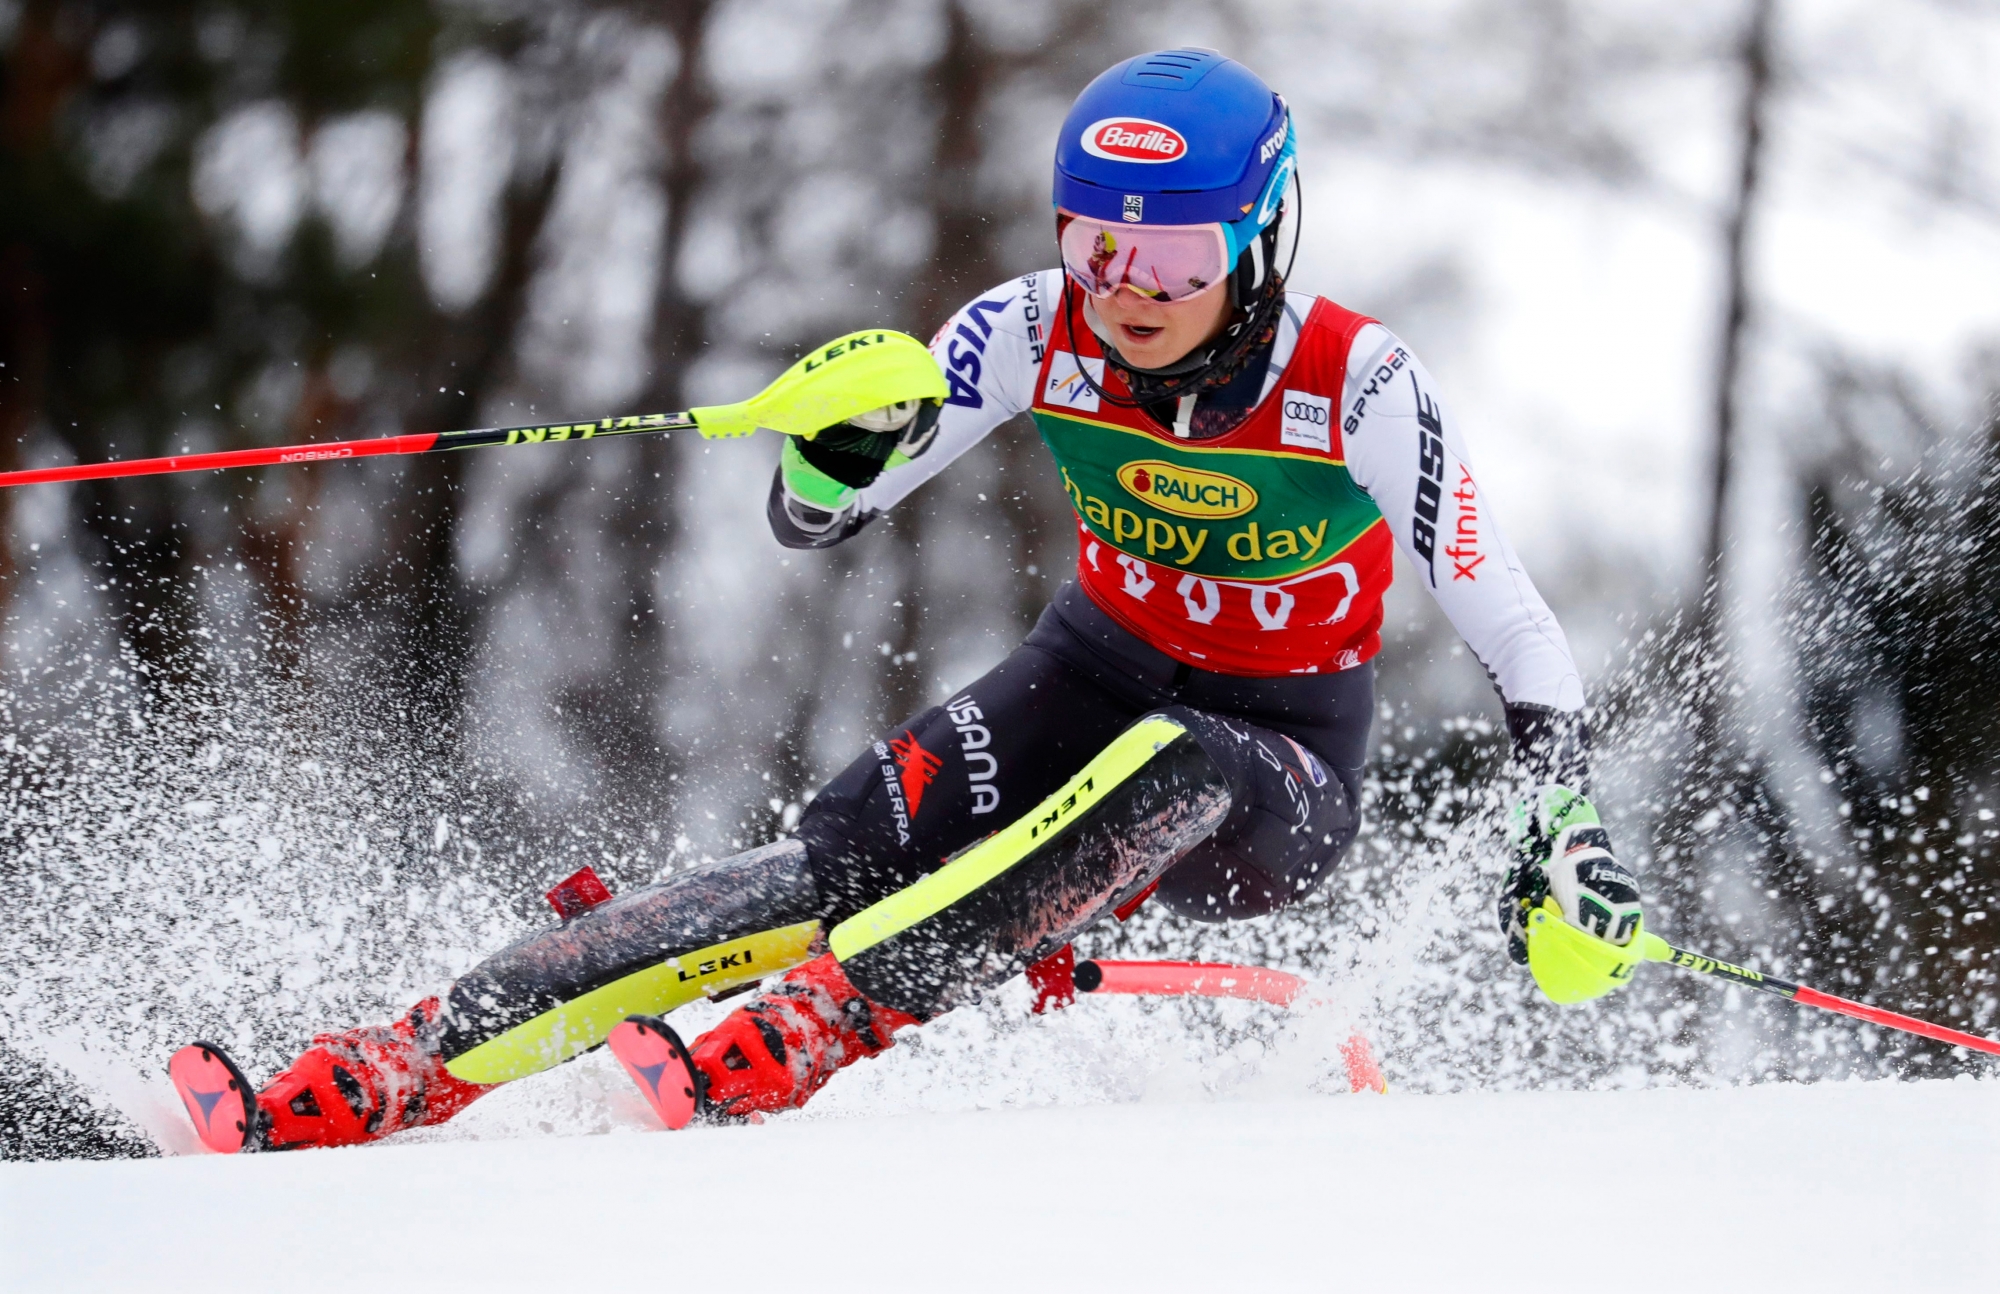 epa07337845 Mikaela Shiffrin of the USA in action during the first run of the women's Slalom race of the FIS Alpine Skiing World Cup in Maribor, Slovenia, 02 February 2019.  EPA/ANTONIO BAT SLOVENIA ALPINE SKIING WORLD CUP